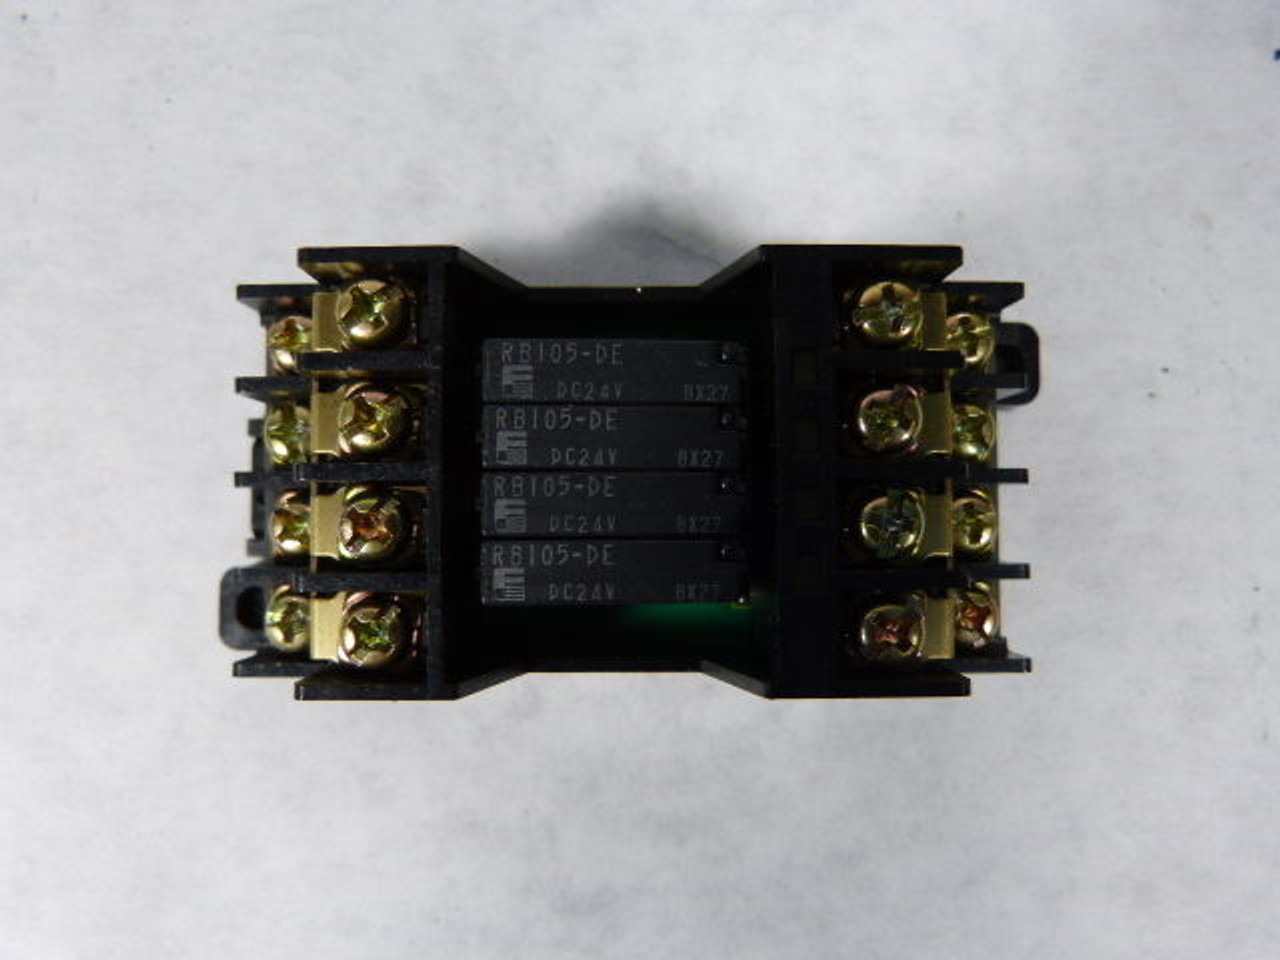 Fuji RS4N-DE Relay Base with RB105-DE USED